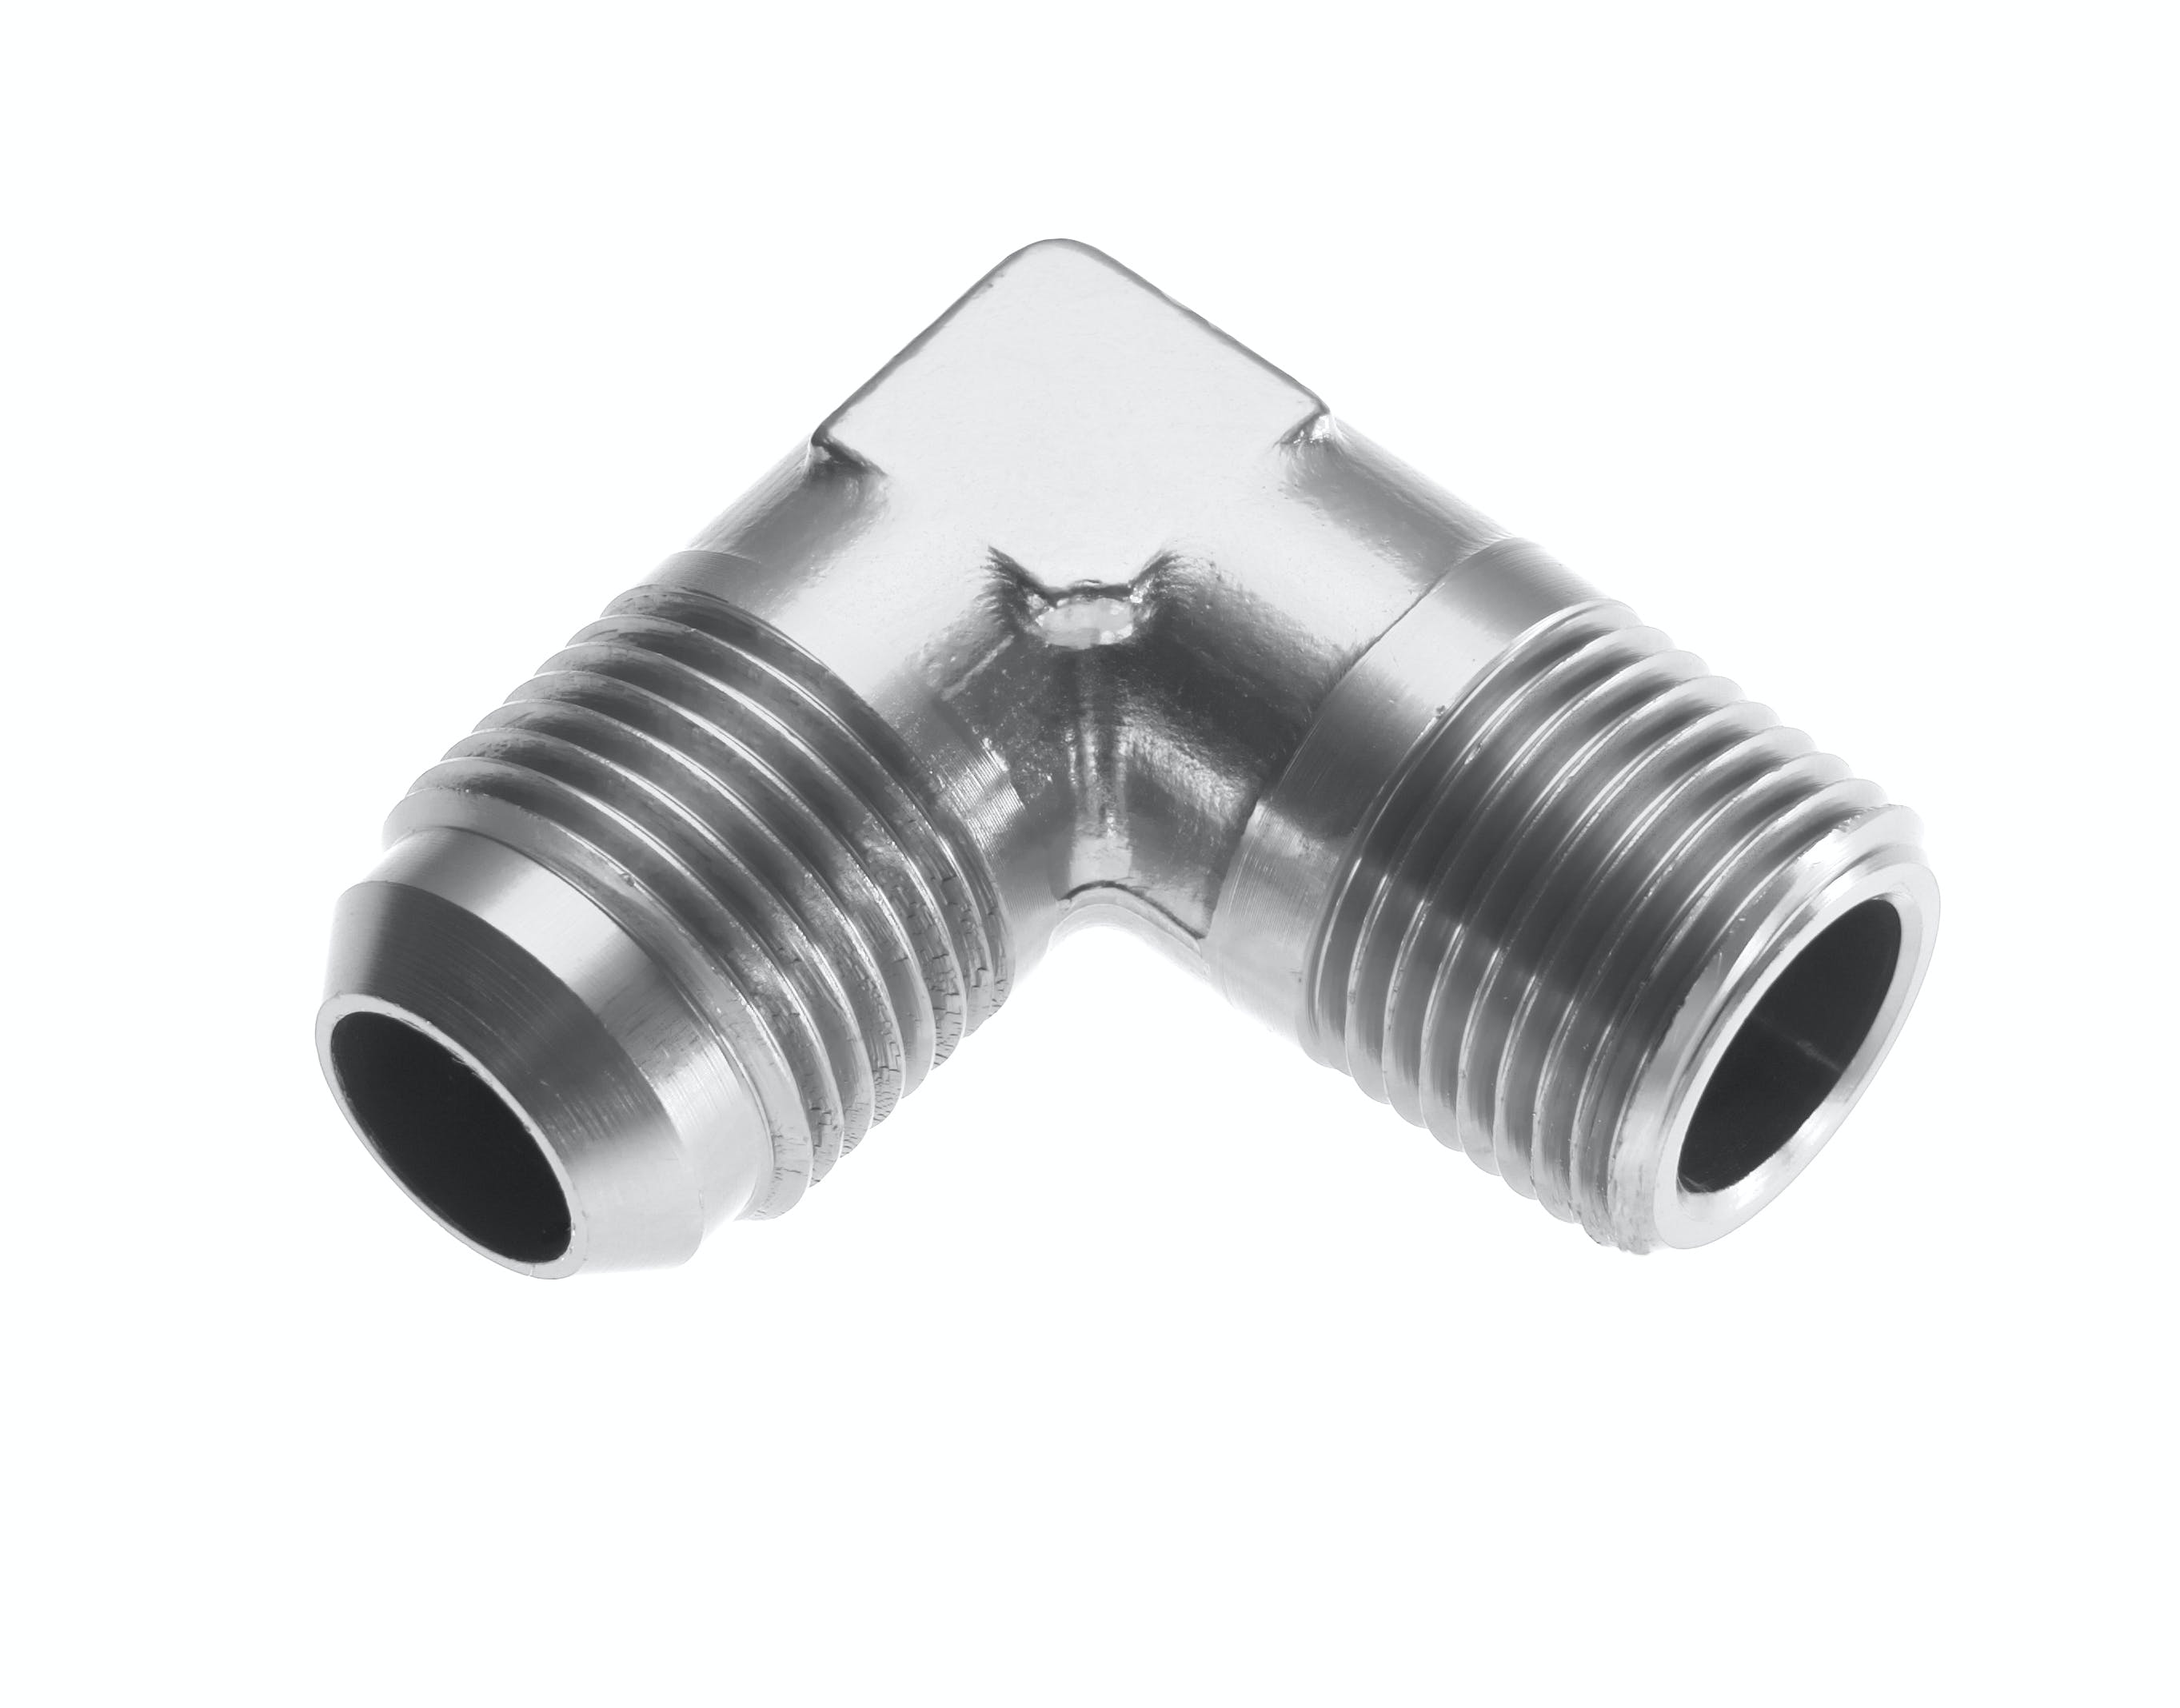 Redhorse Performance 822-08-06-5 -08 90 degree Male adapter to -06 (3/8in) NPT Male - clear